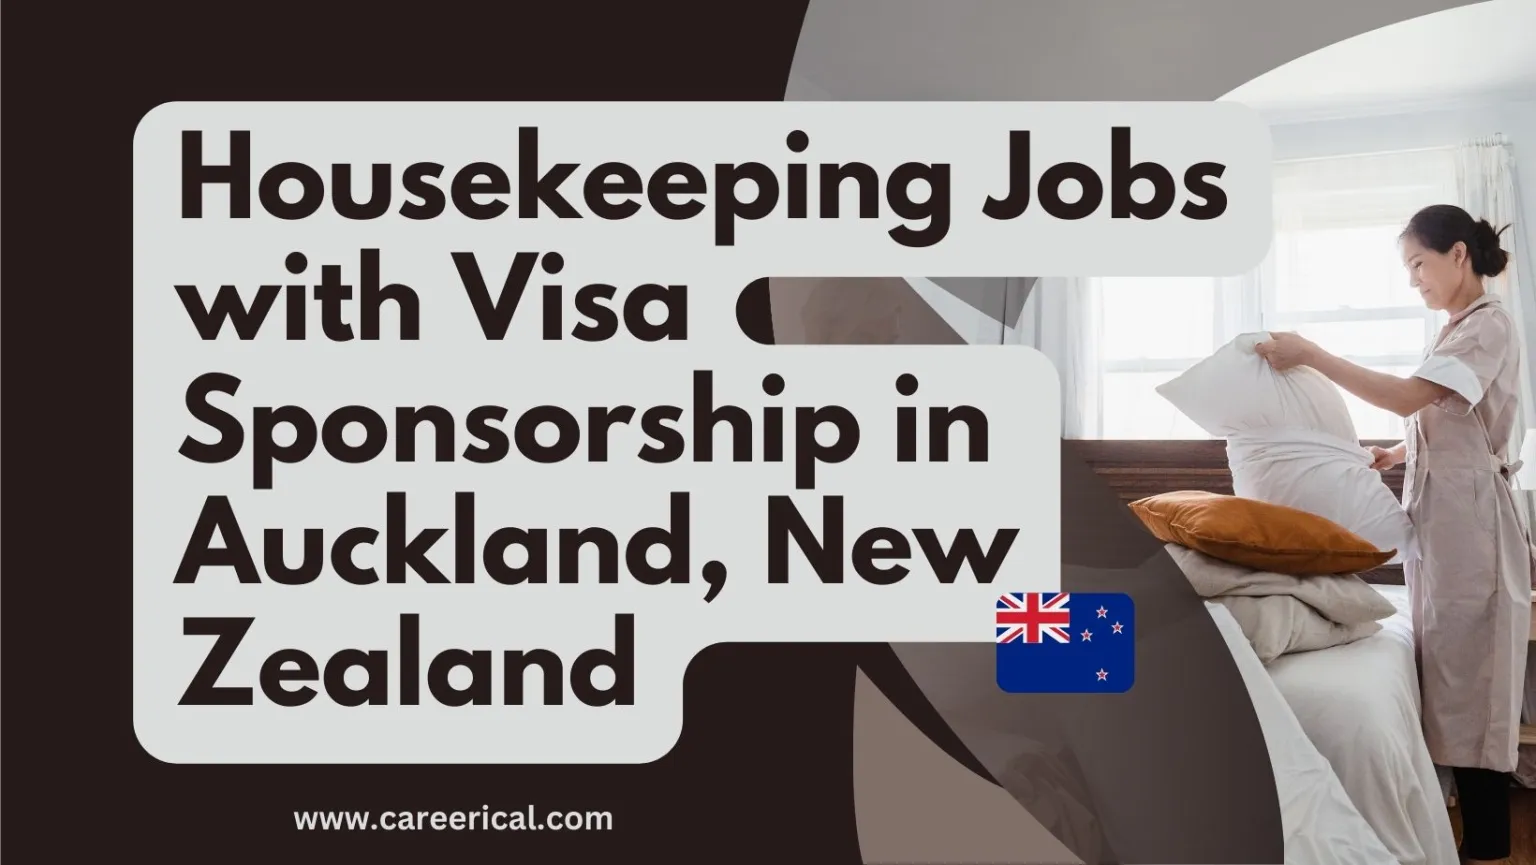 Housekeeping Jobs with Visa Sponsorship in Auckland New Zealand